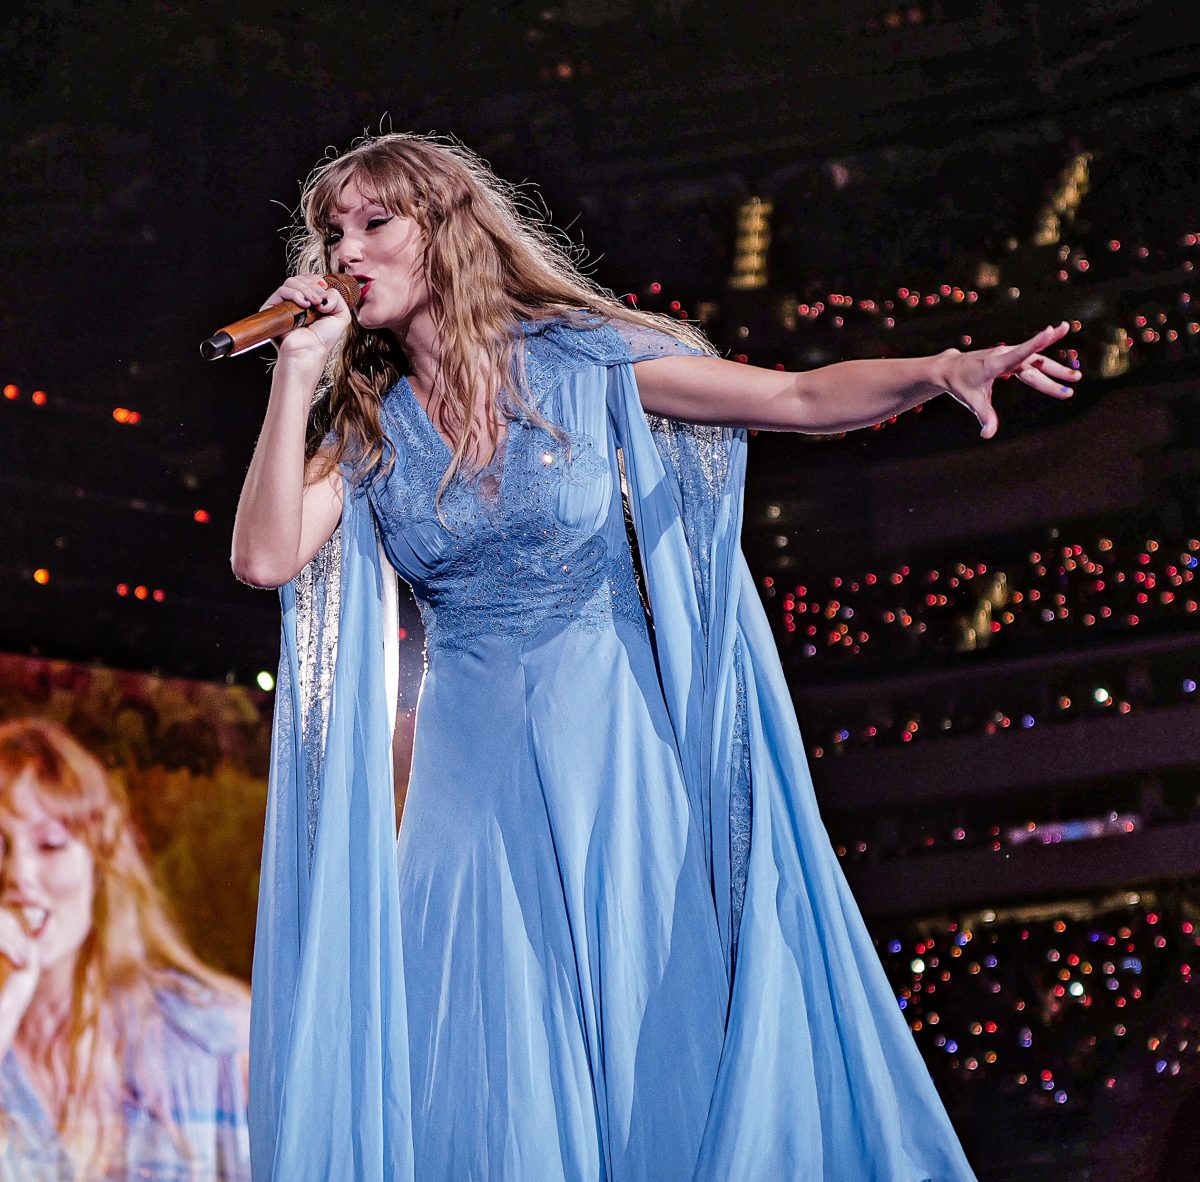 Taylor Swift performing during the Eras tour. 

Photo by Paolo Villanueva from Wikimedia. 